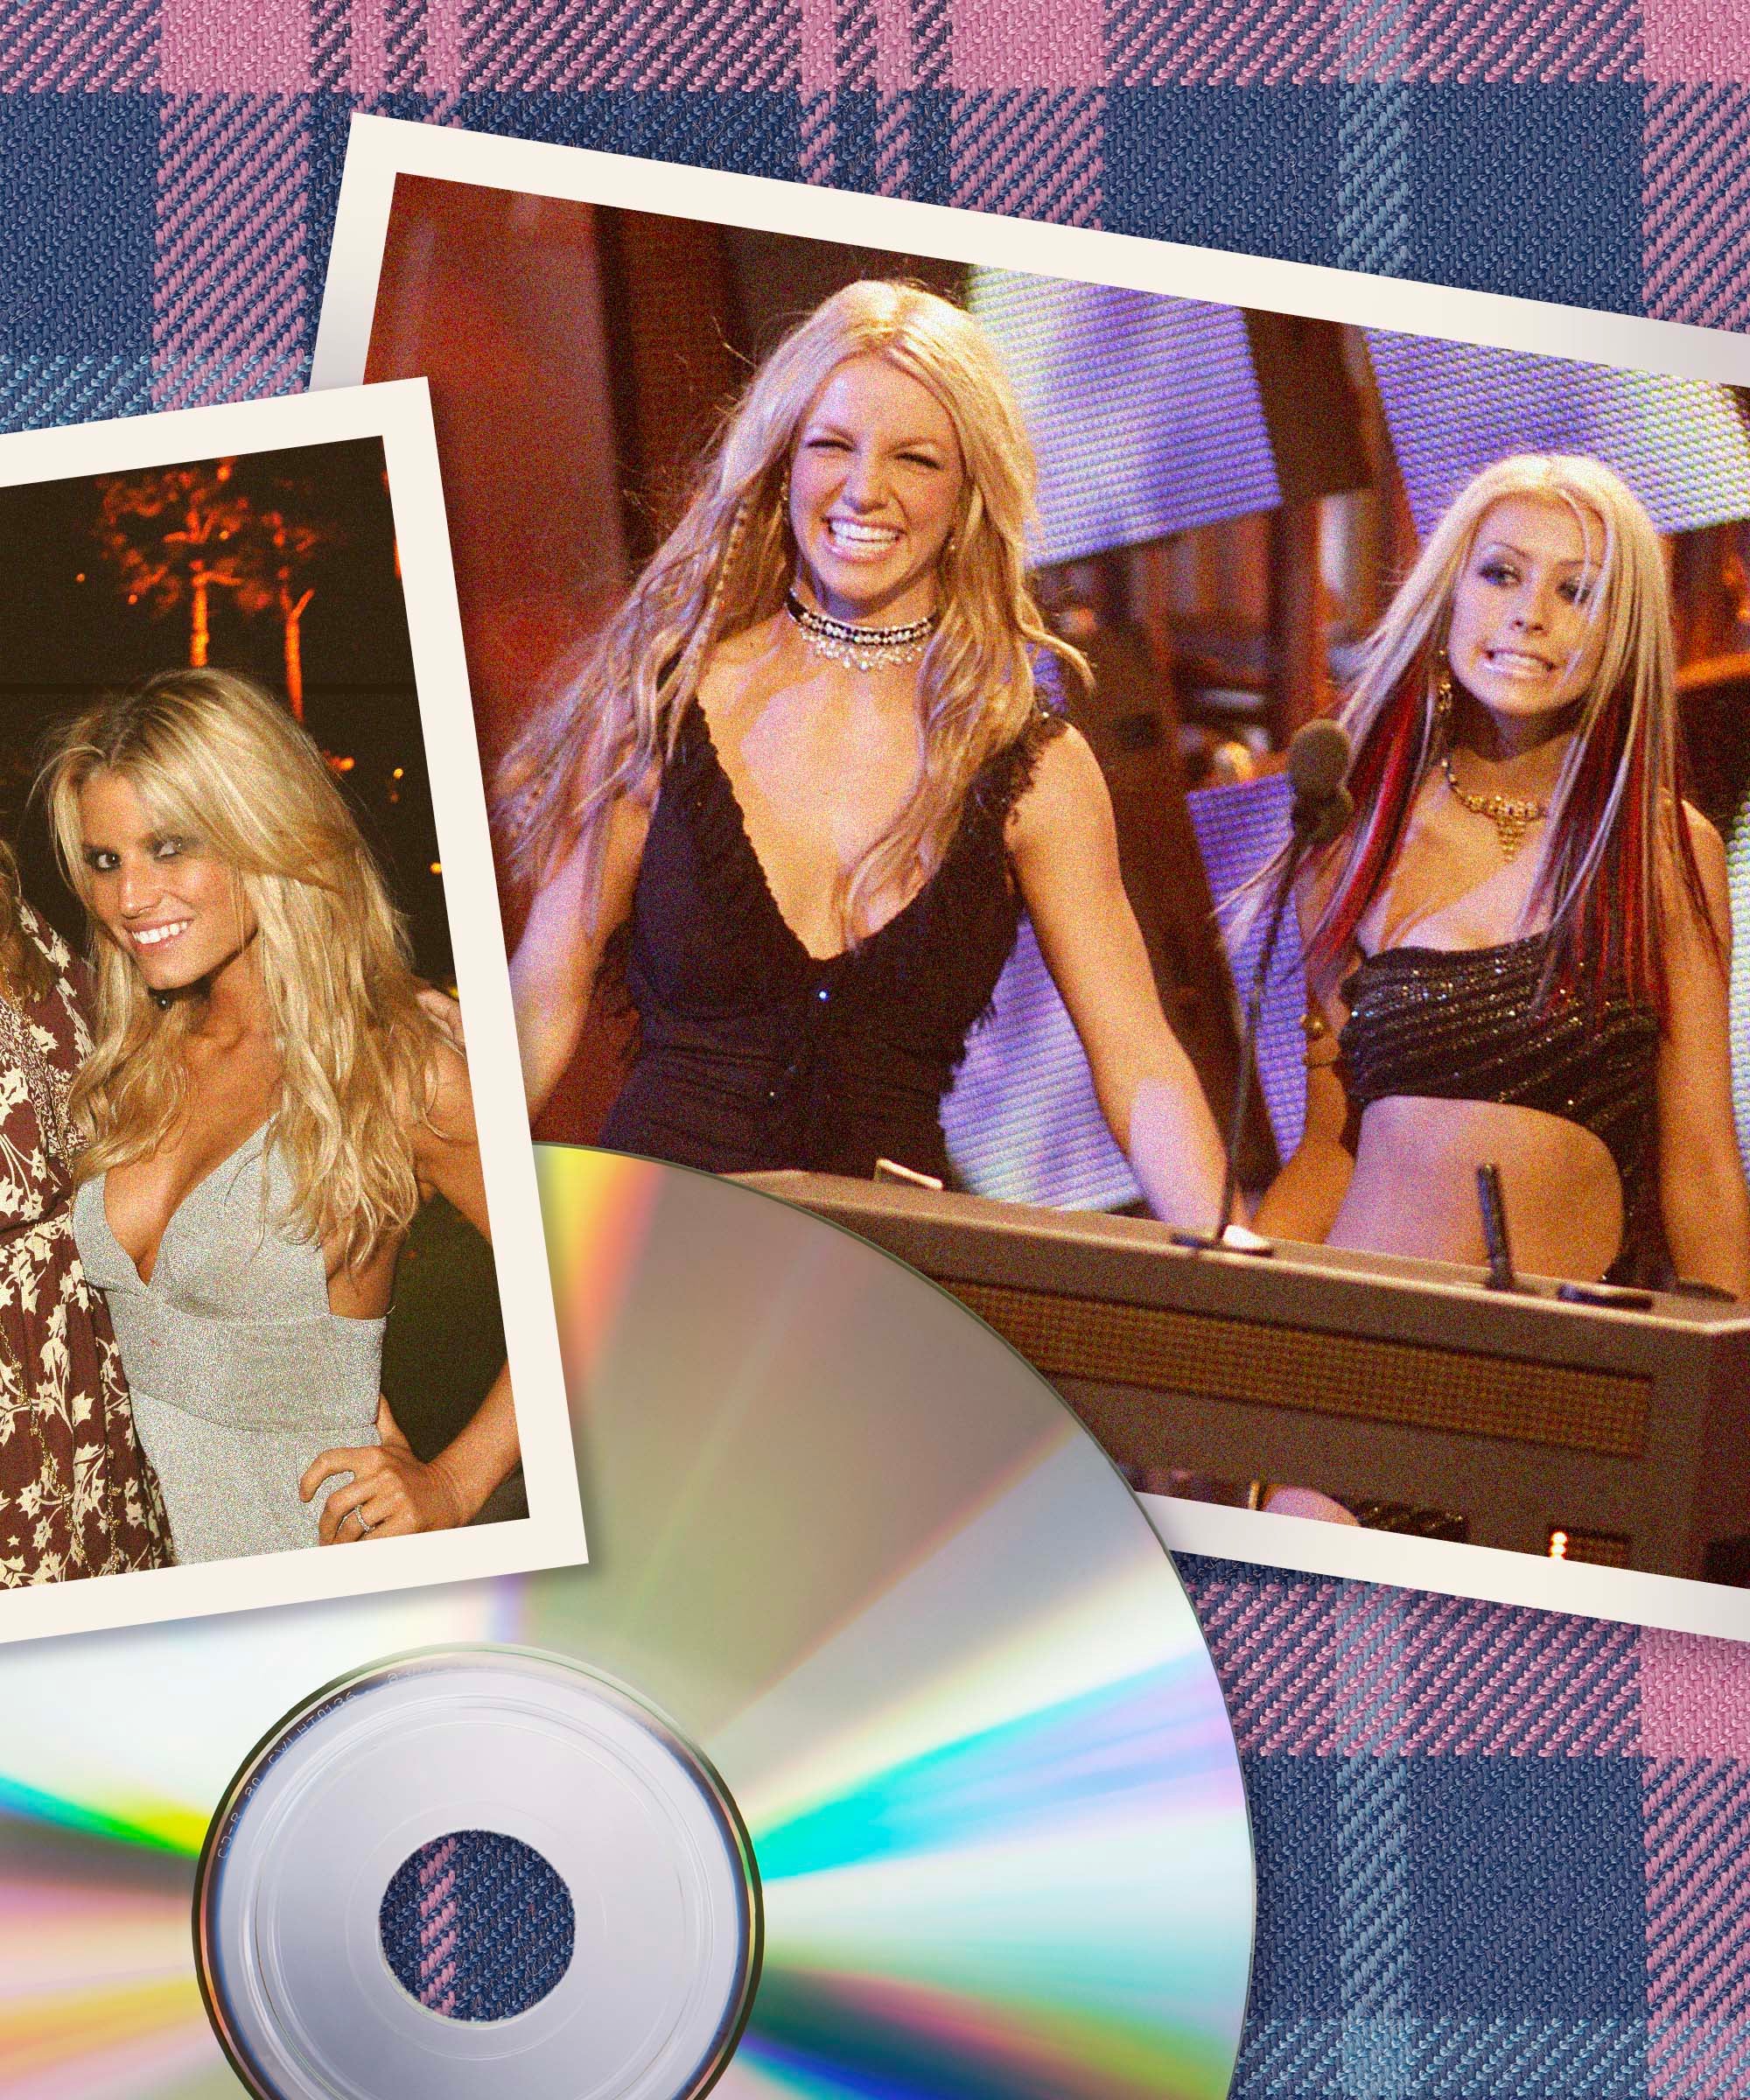 Why Britney and Christina Had To Be Virgins For The Media